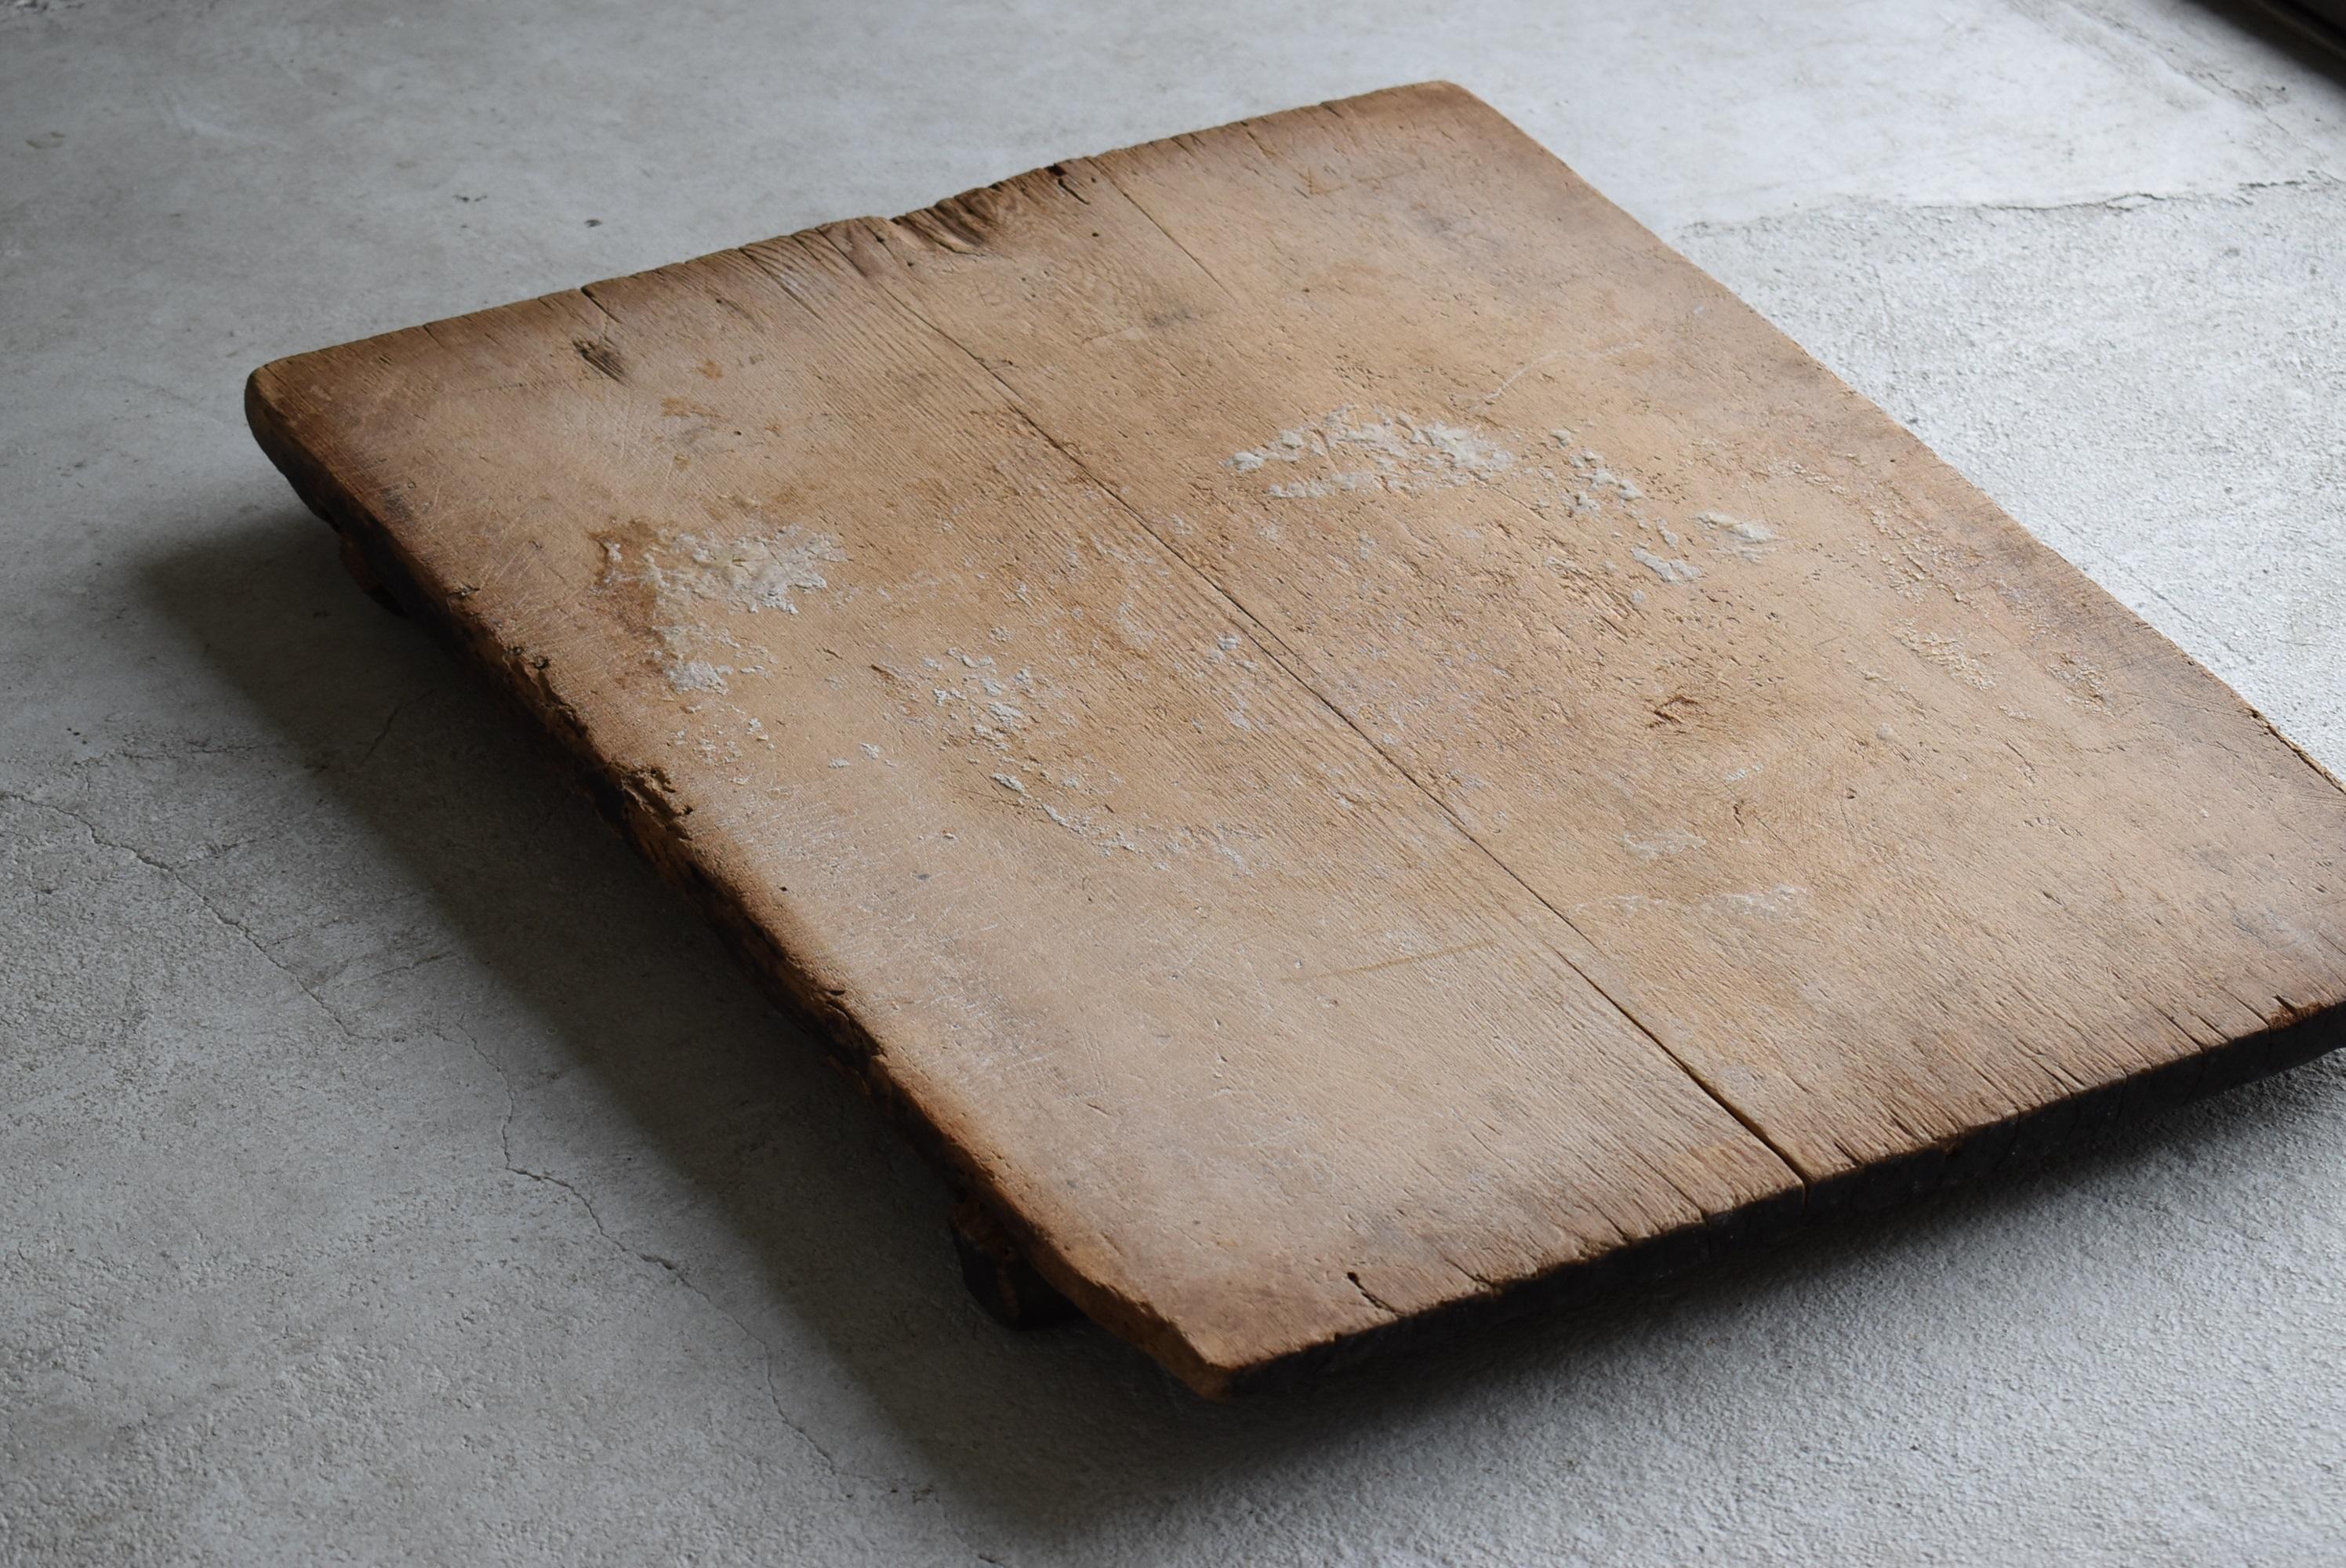 Japanese Antique Wooden Board 1800s-1900s/Abstract Art Working Table Wabisabi 7